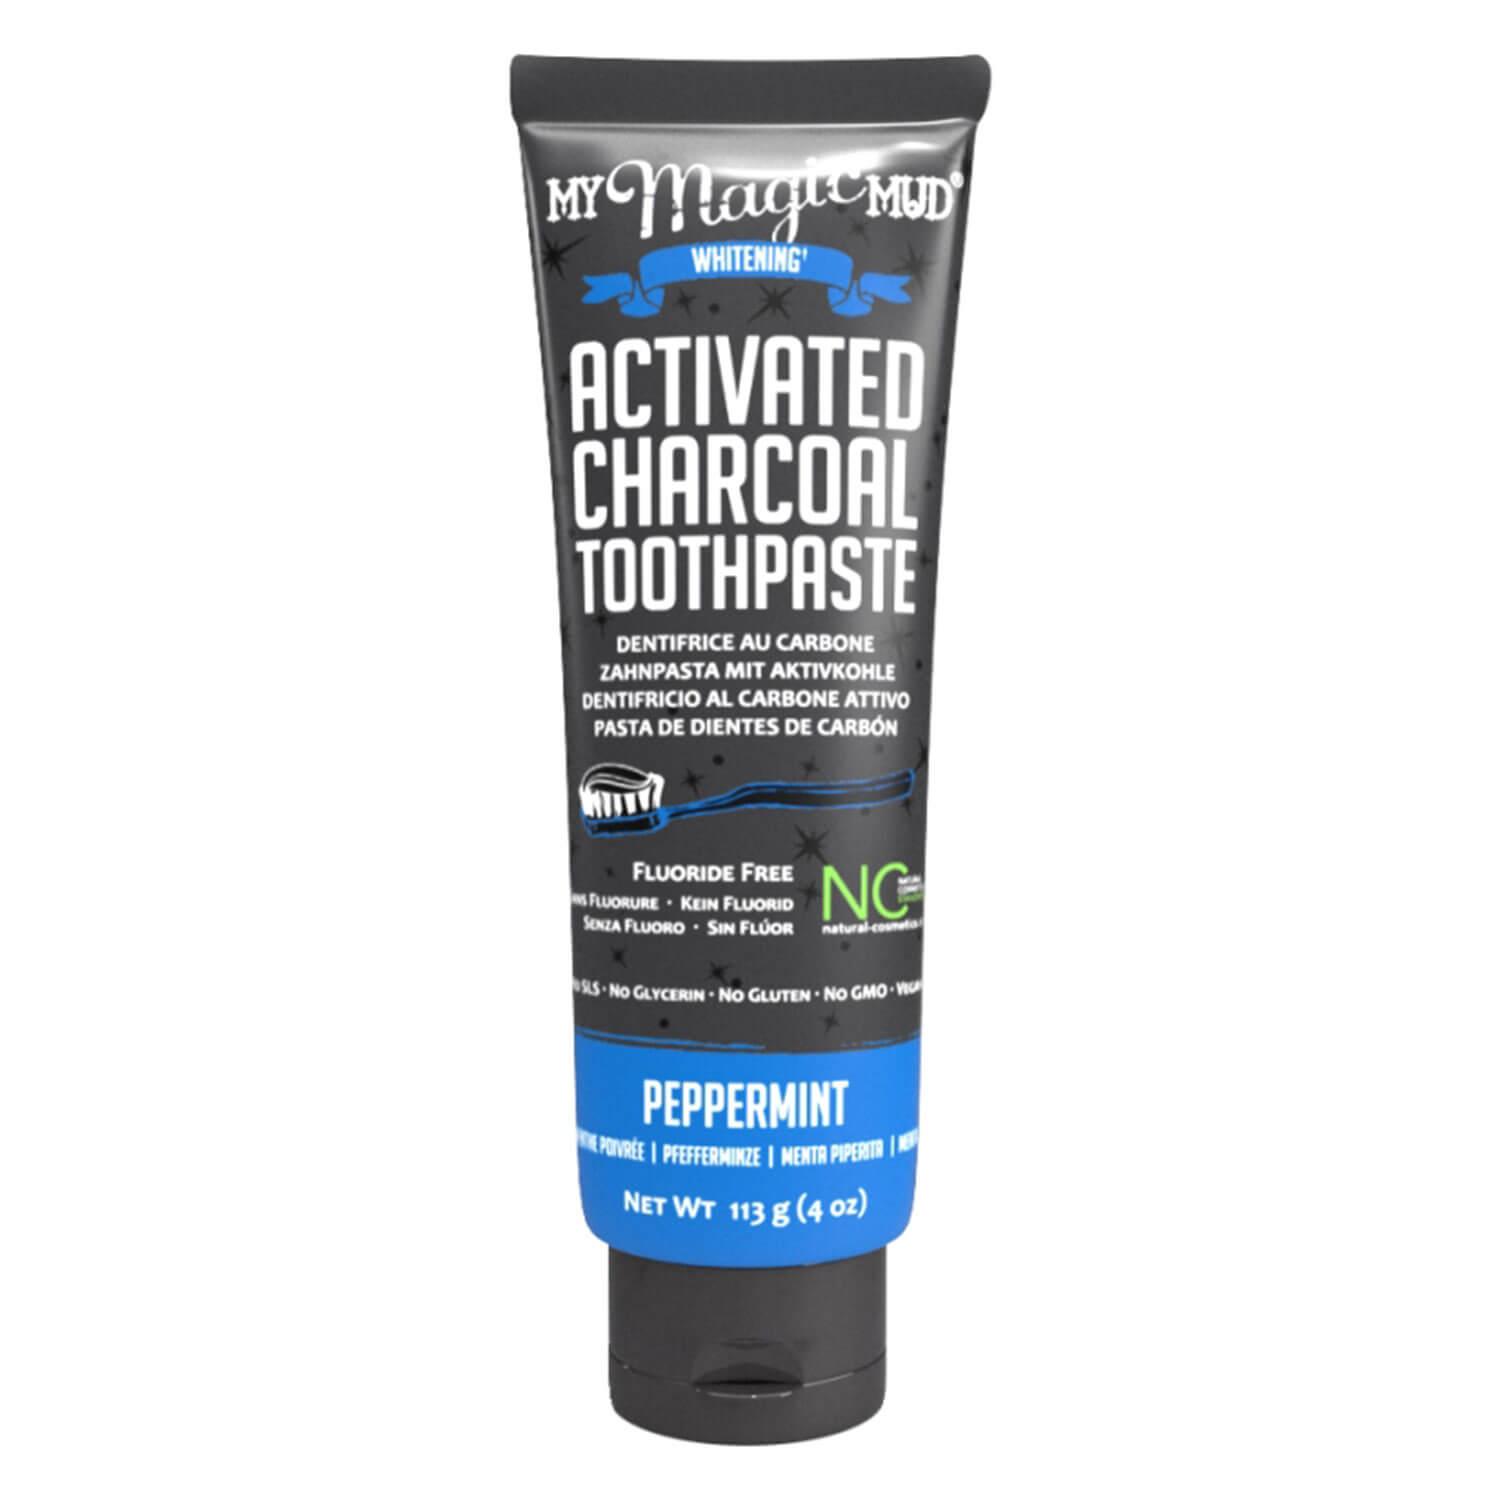 My Magic Mud - Activated Charcoal Toothpaste Peppermint